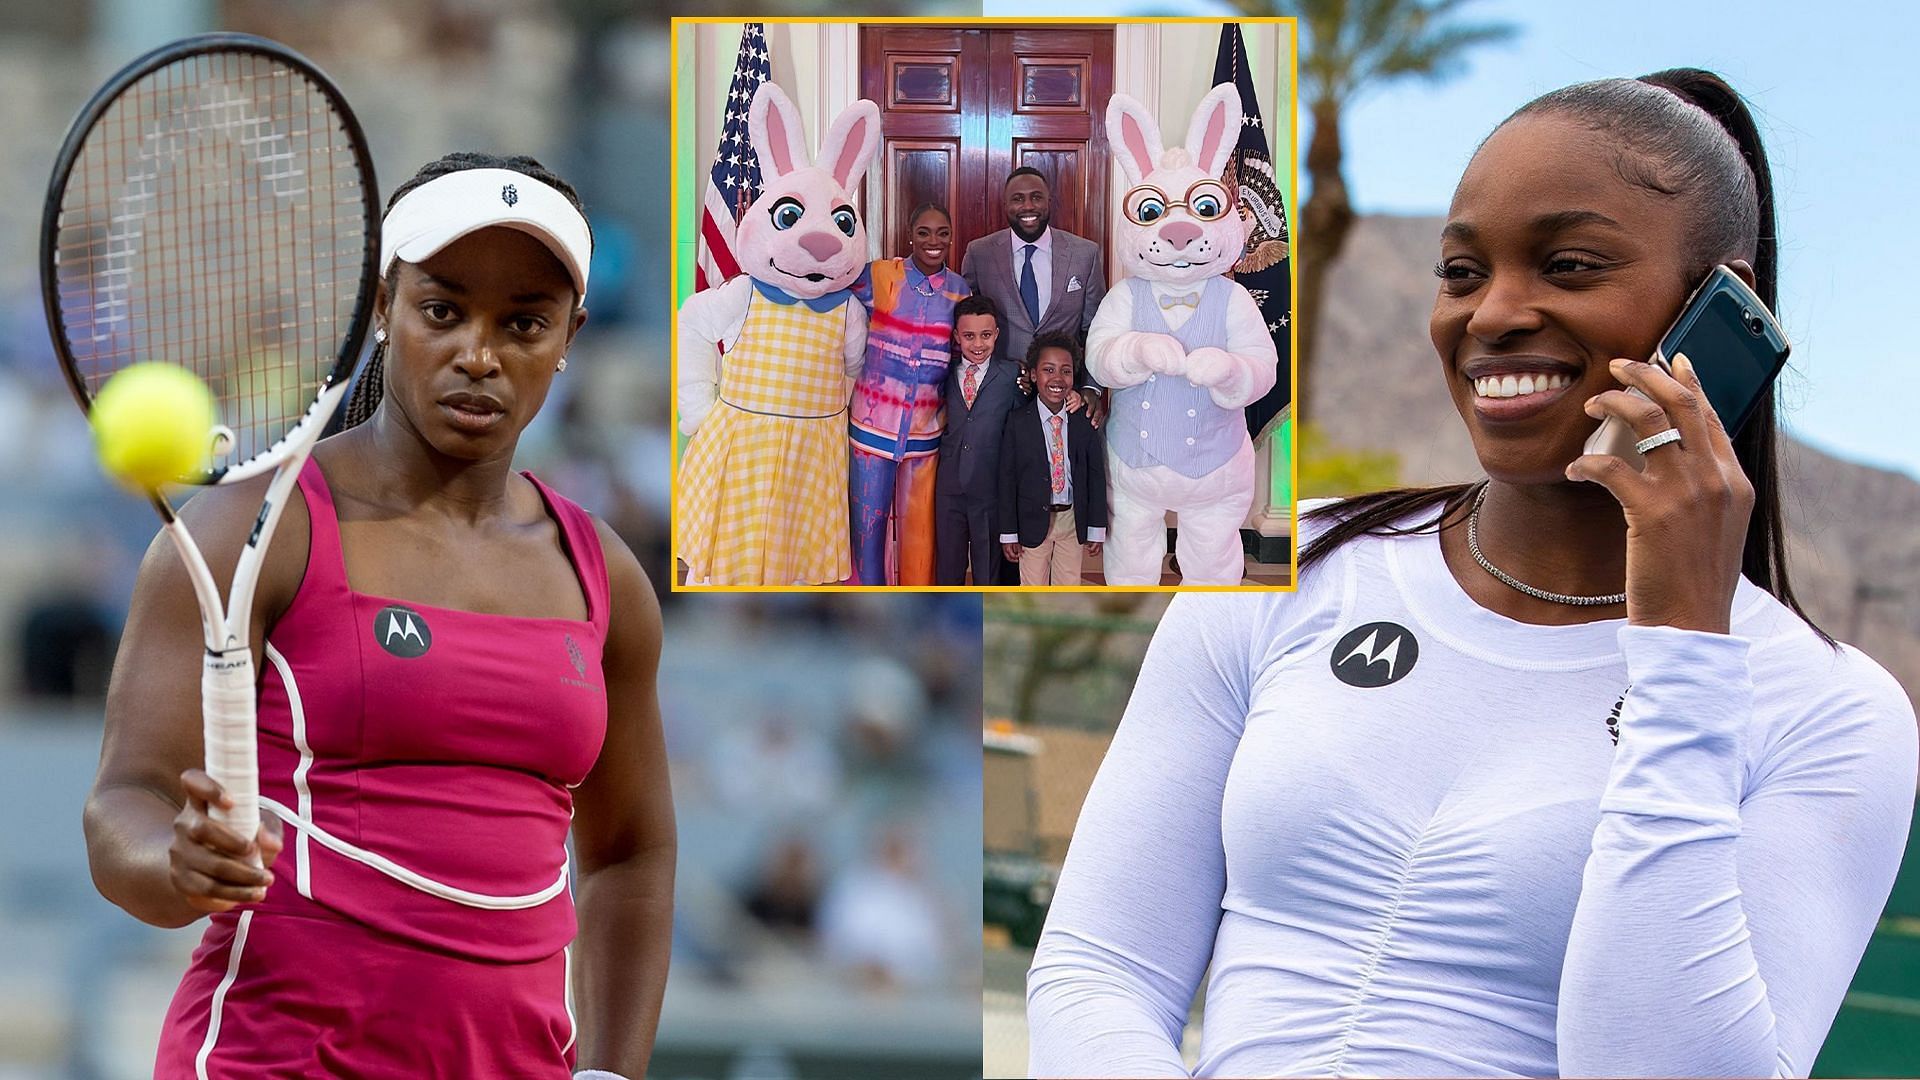 Sloane Stephens discusses new kits after Nike split, trip to the White House with stepson, and more